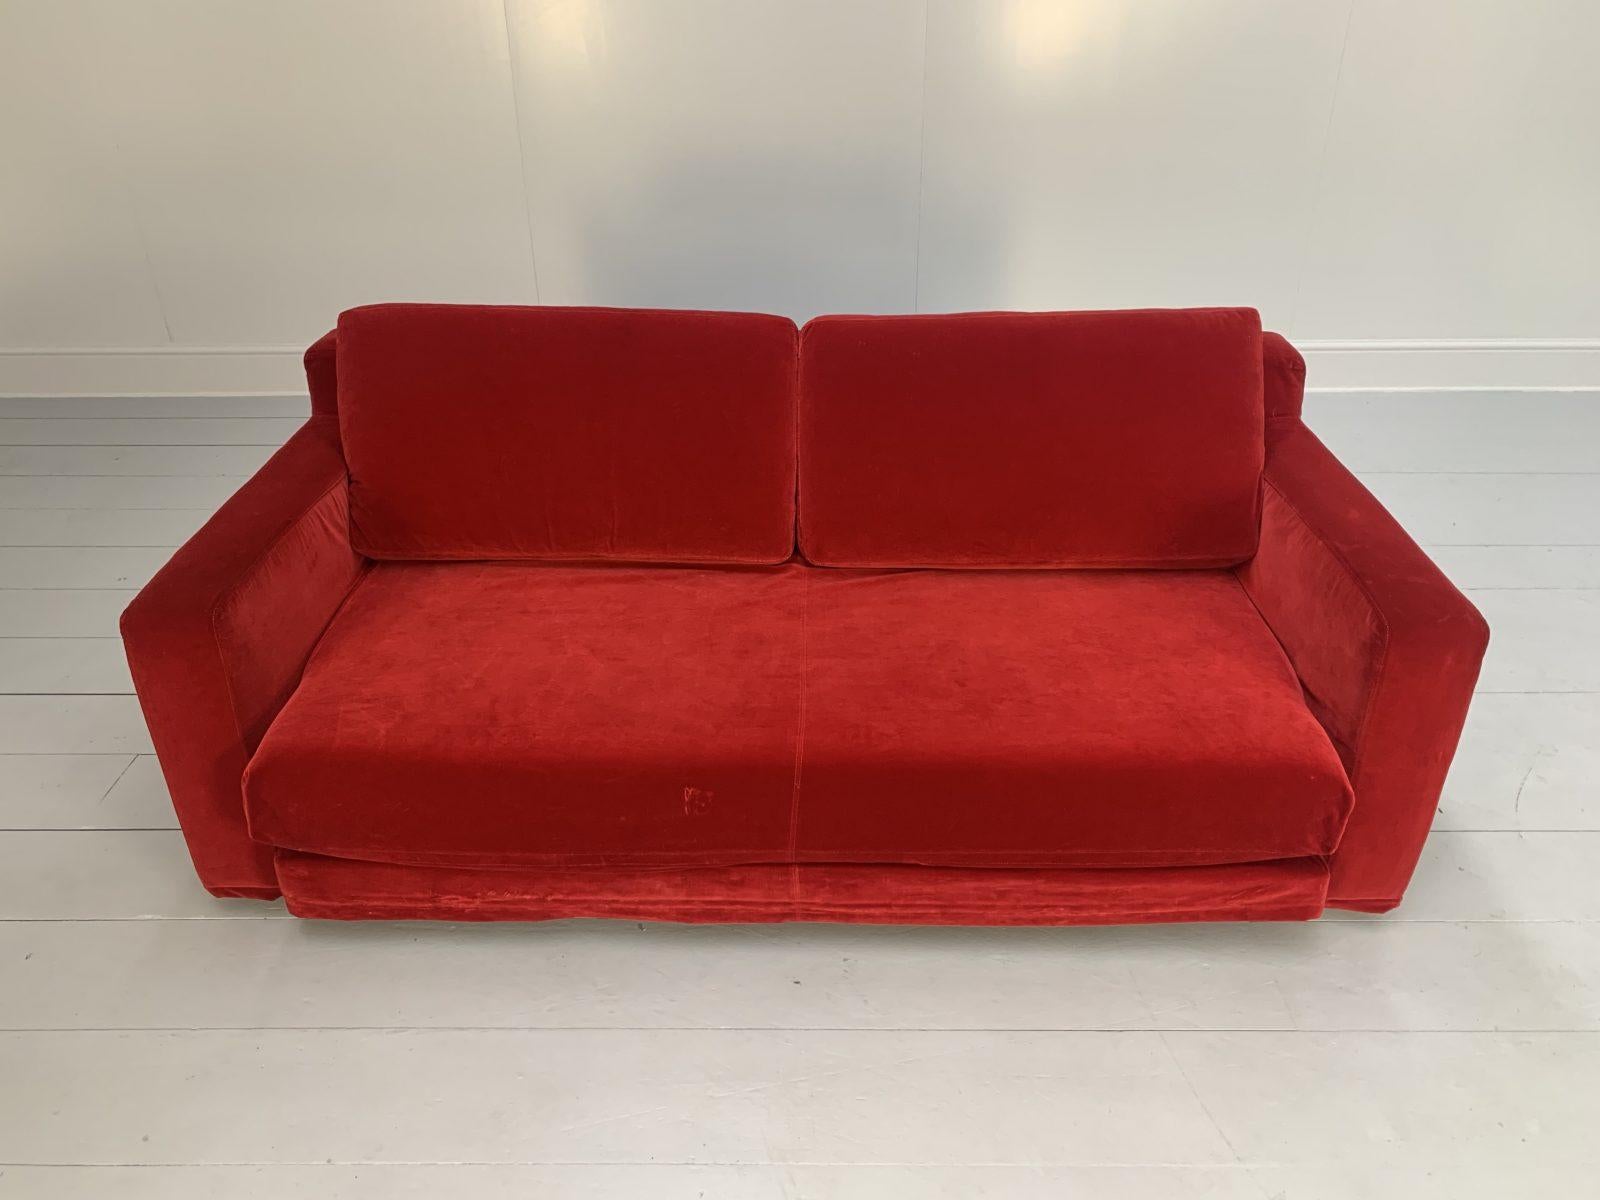 Flexform “Winny” Large 2.5-Seat Sofa-Bed in Red Velvet In Good Condition In Barrowford, GB